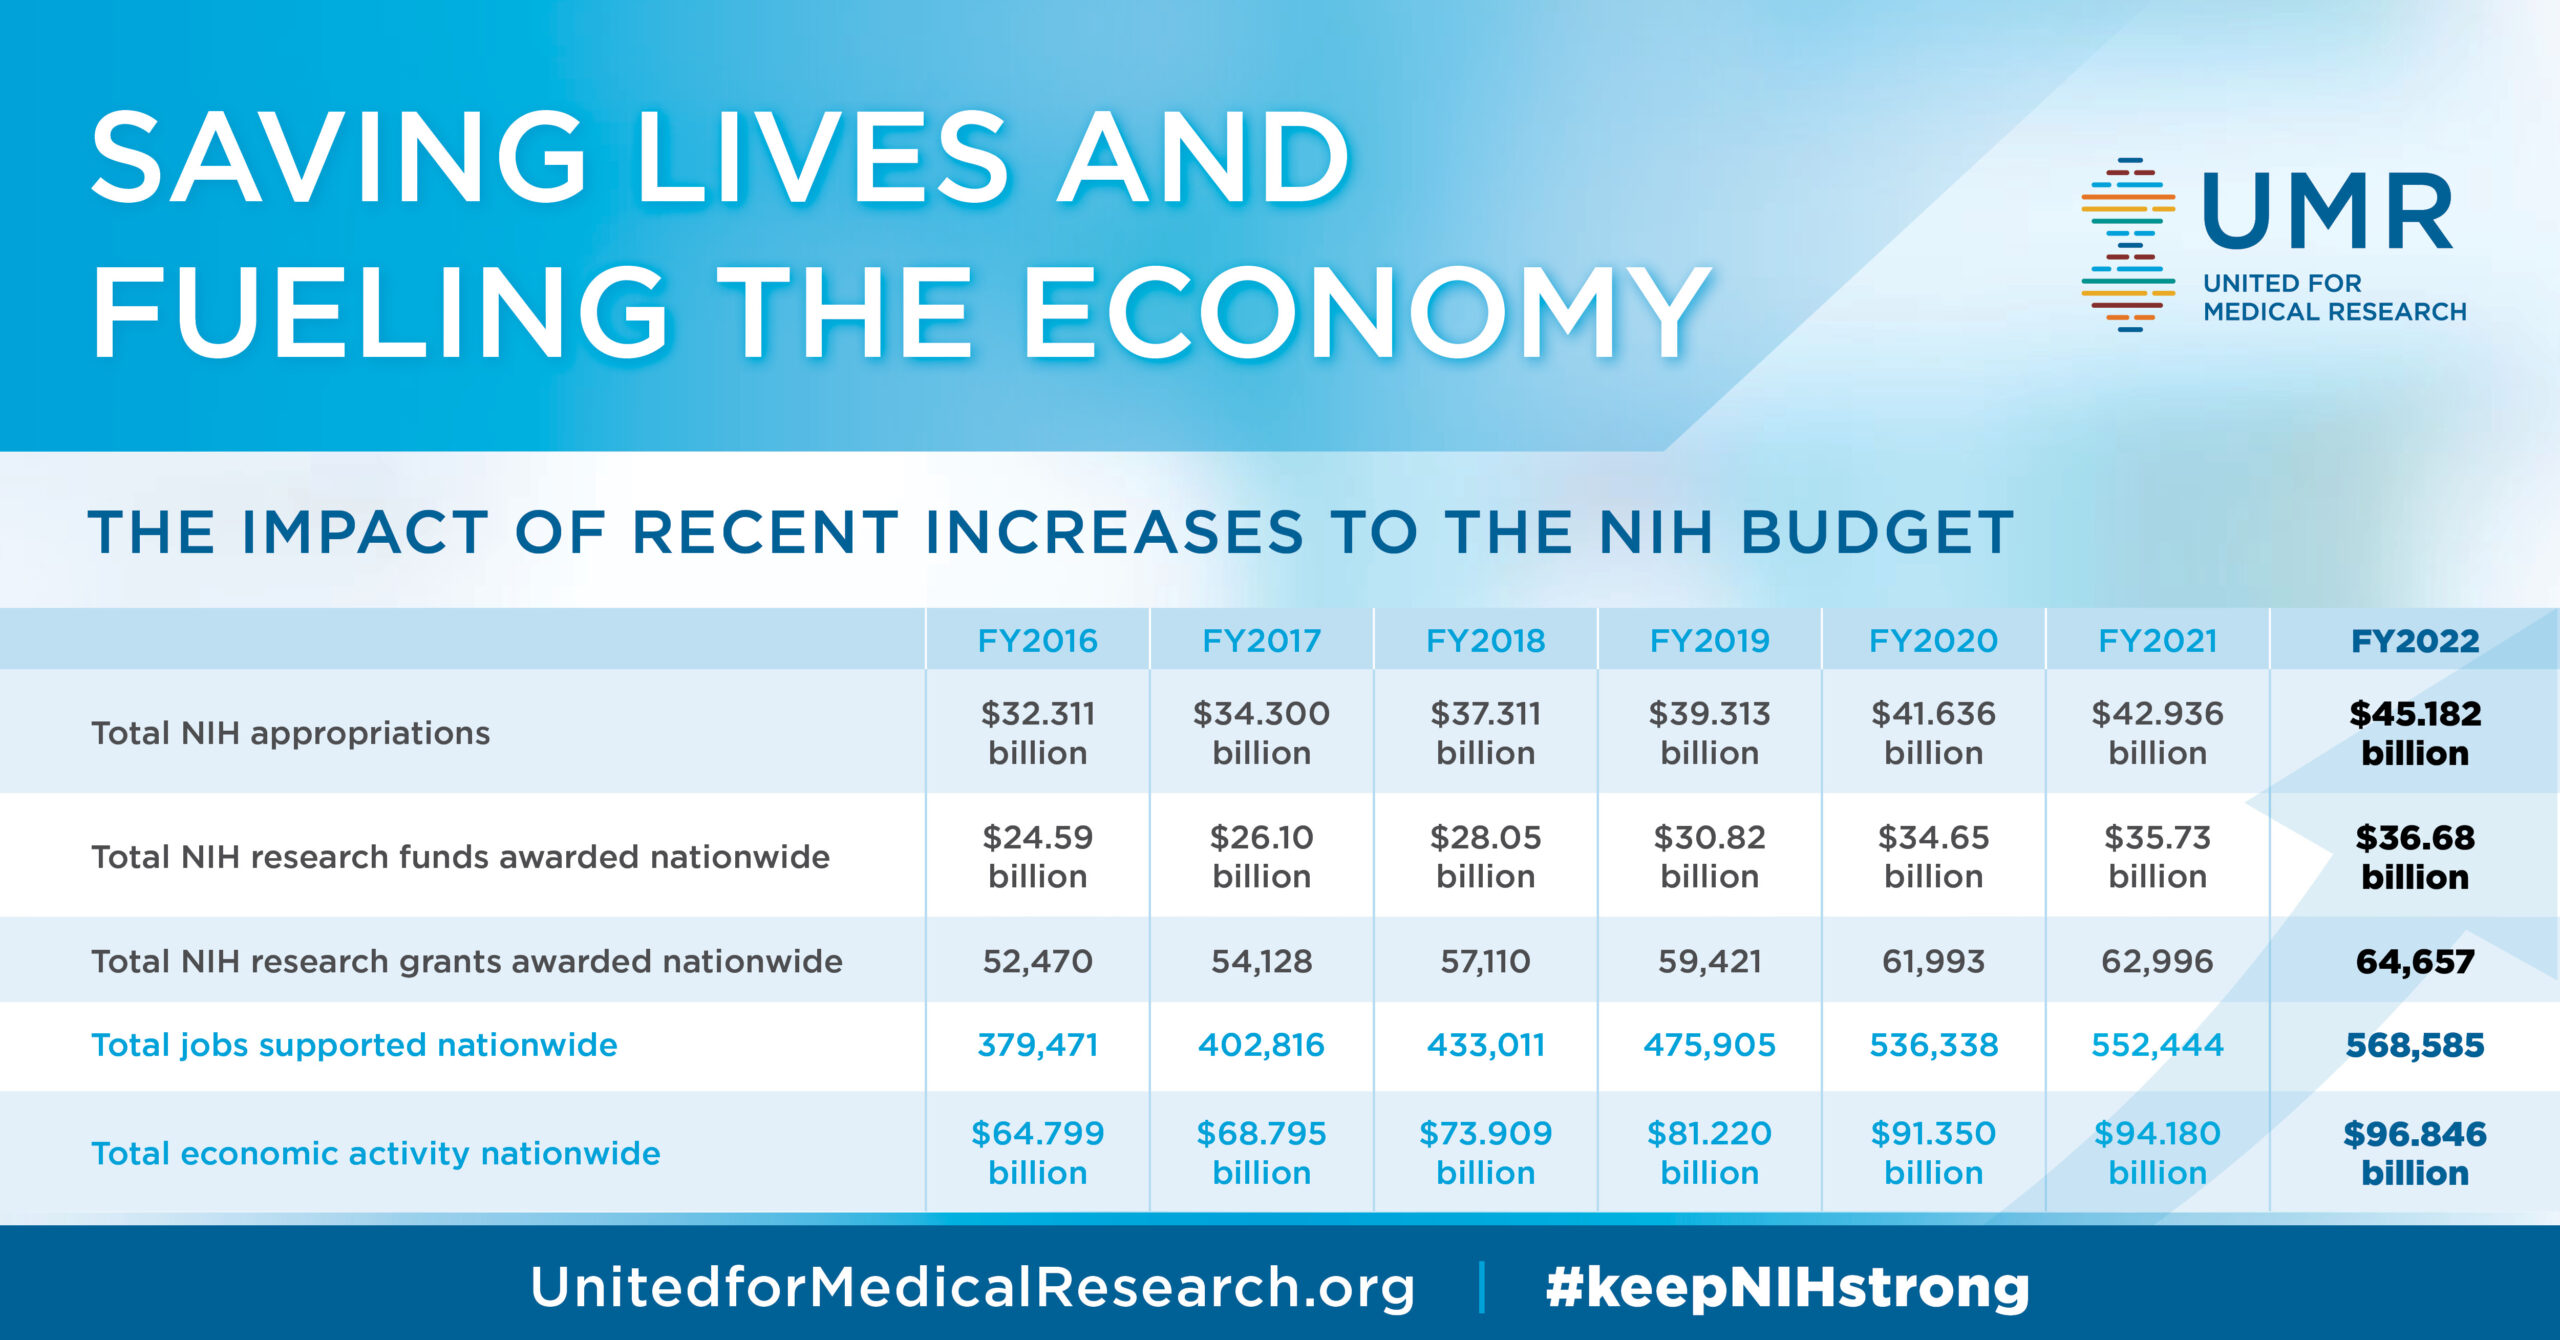 The impact of recent increases to the NIH budget [FY2016-FY2022 table]